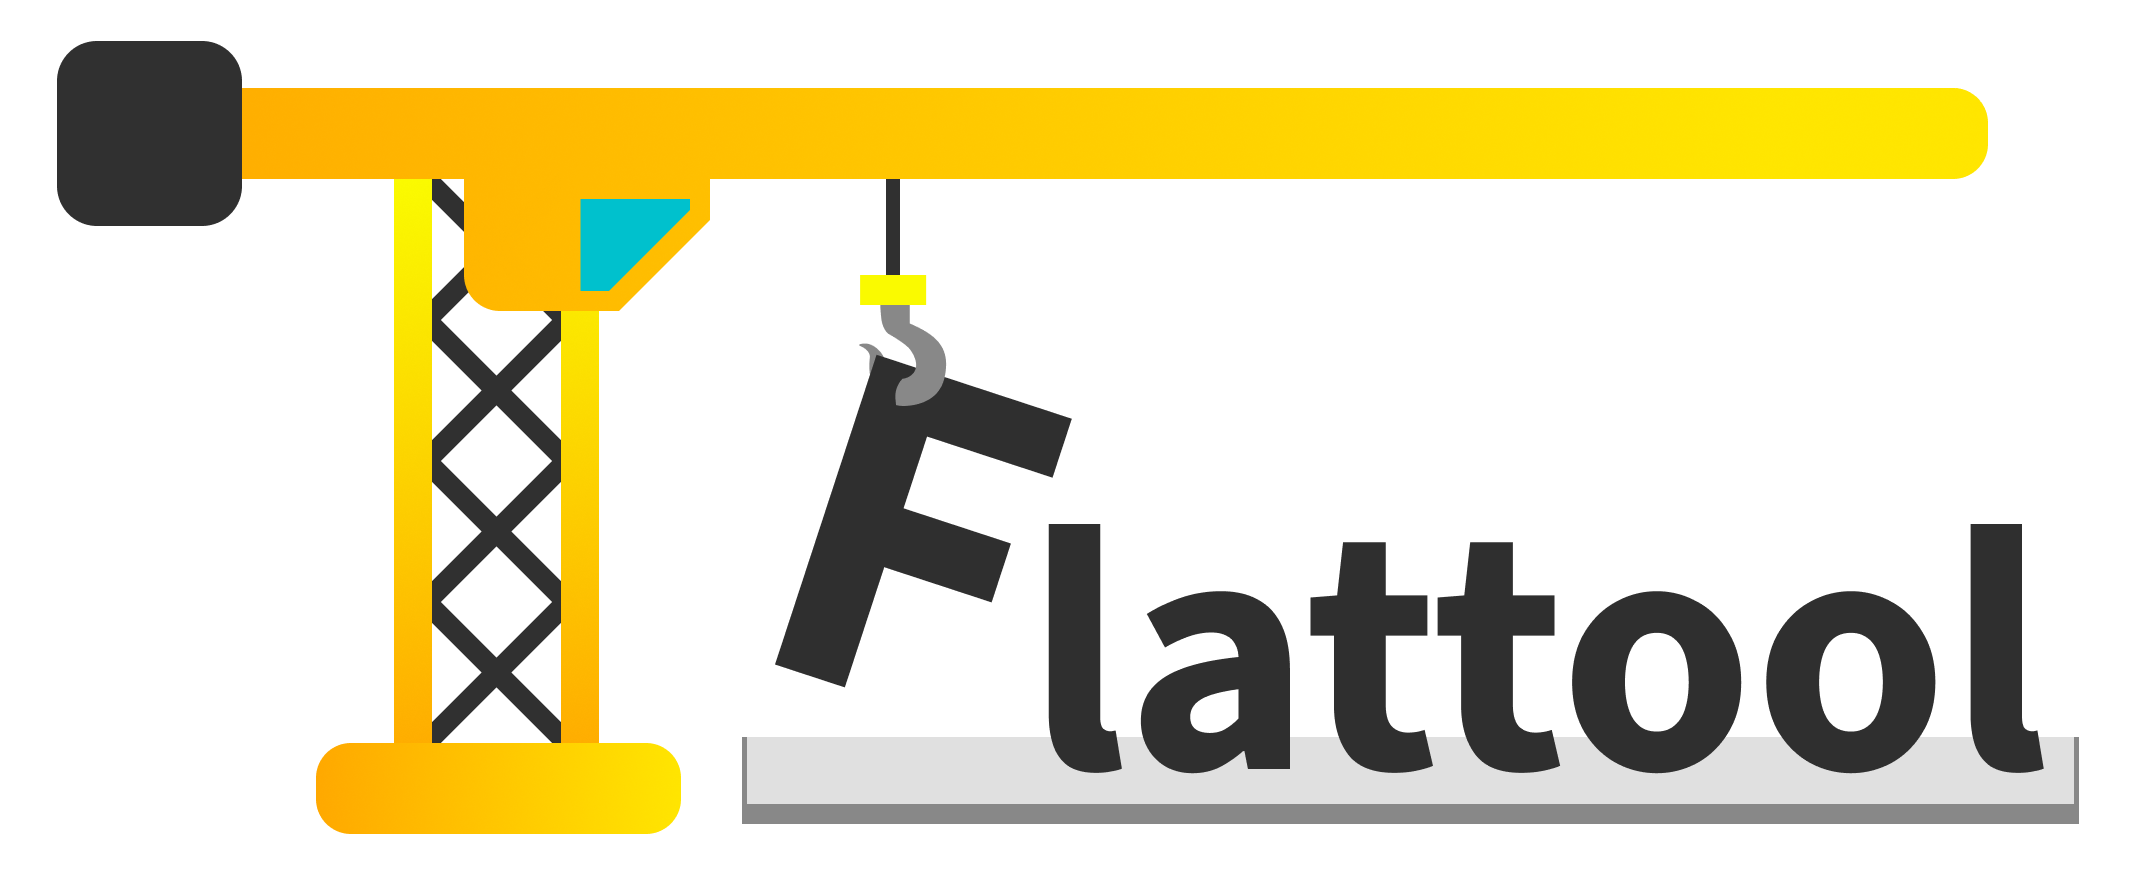 Flattool Logo a simple icon of a tower crane holding a dangling letter F in front of "lattool"